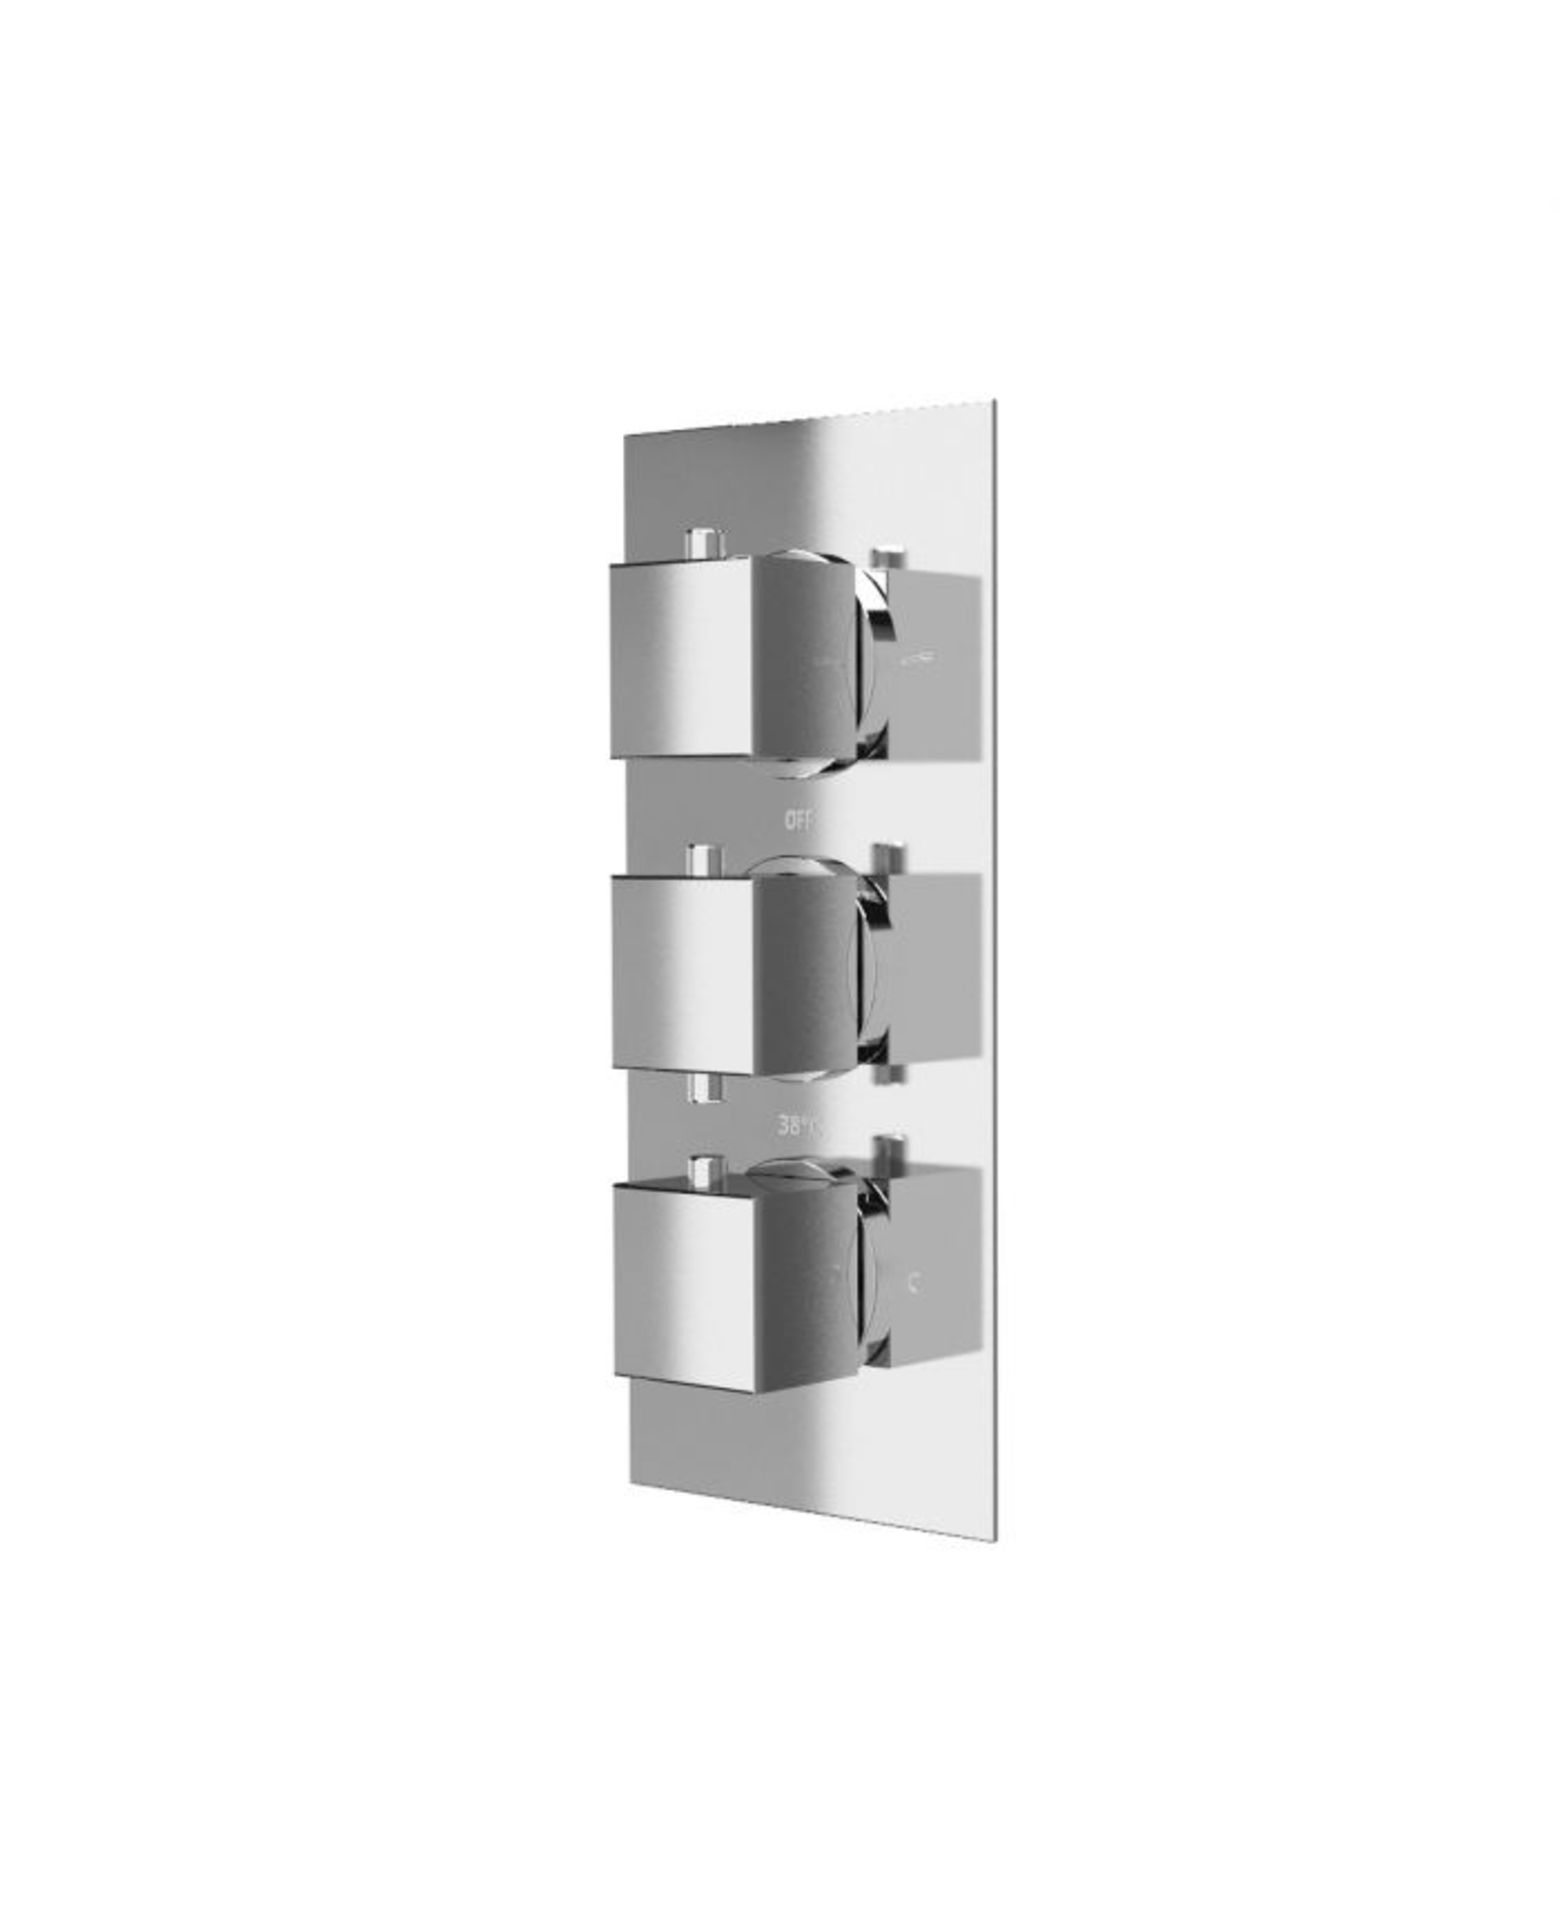 New (D102) Thermostatic Concealed Shower Valve Square Handle 2 Way.